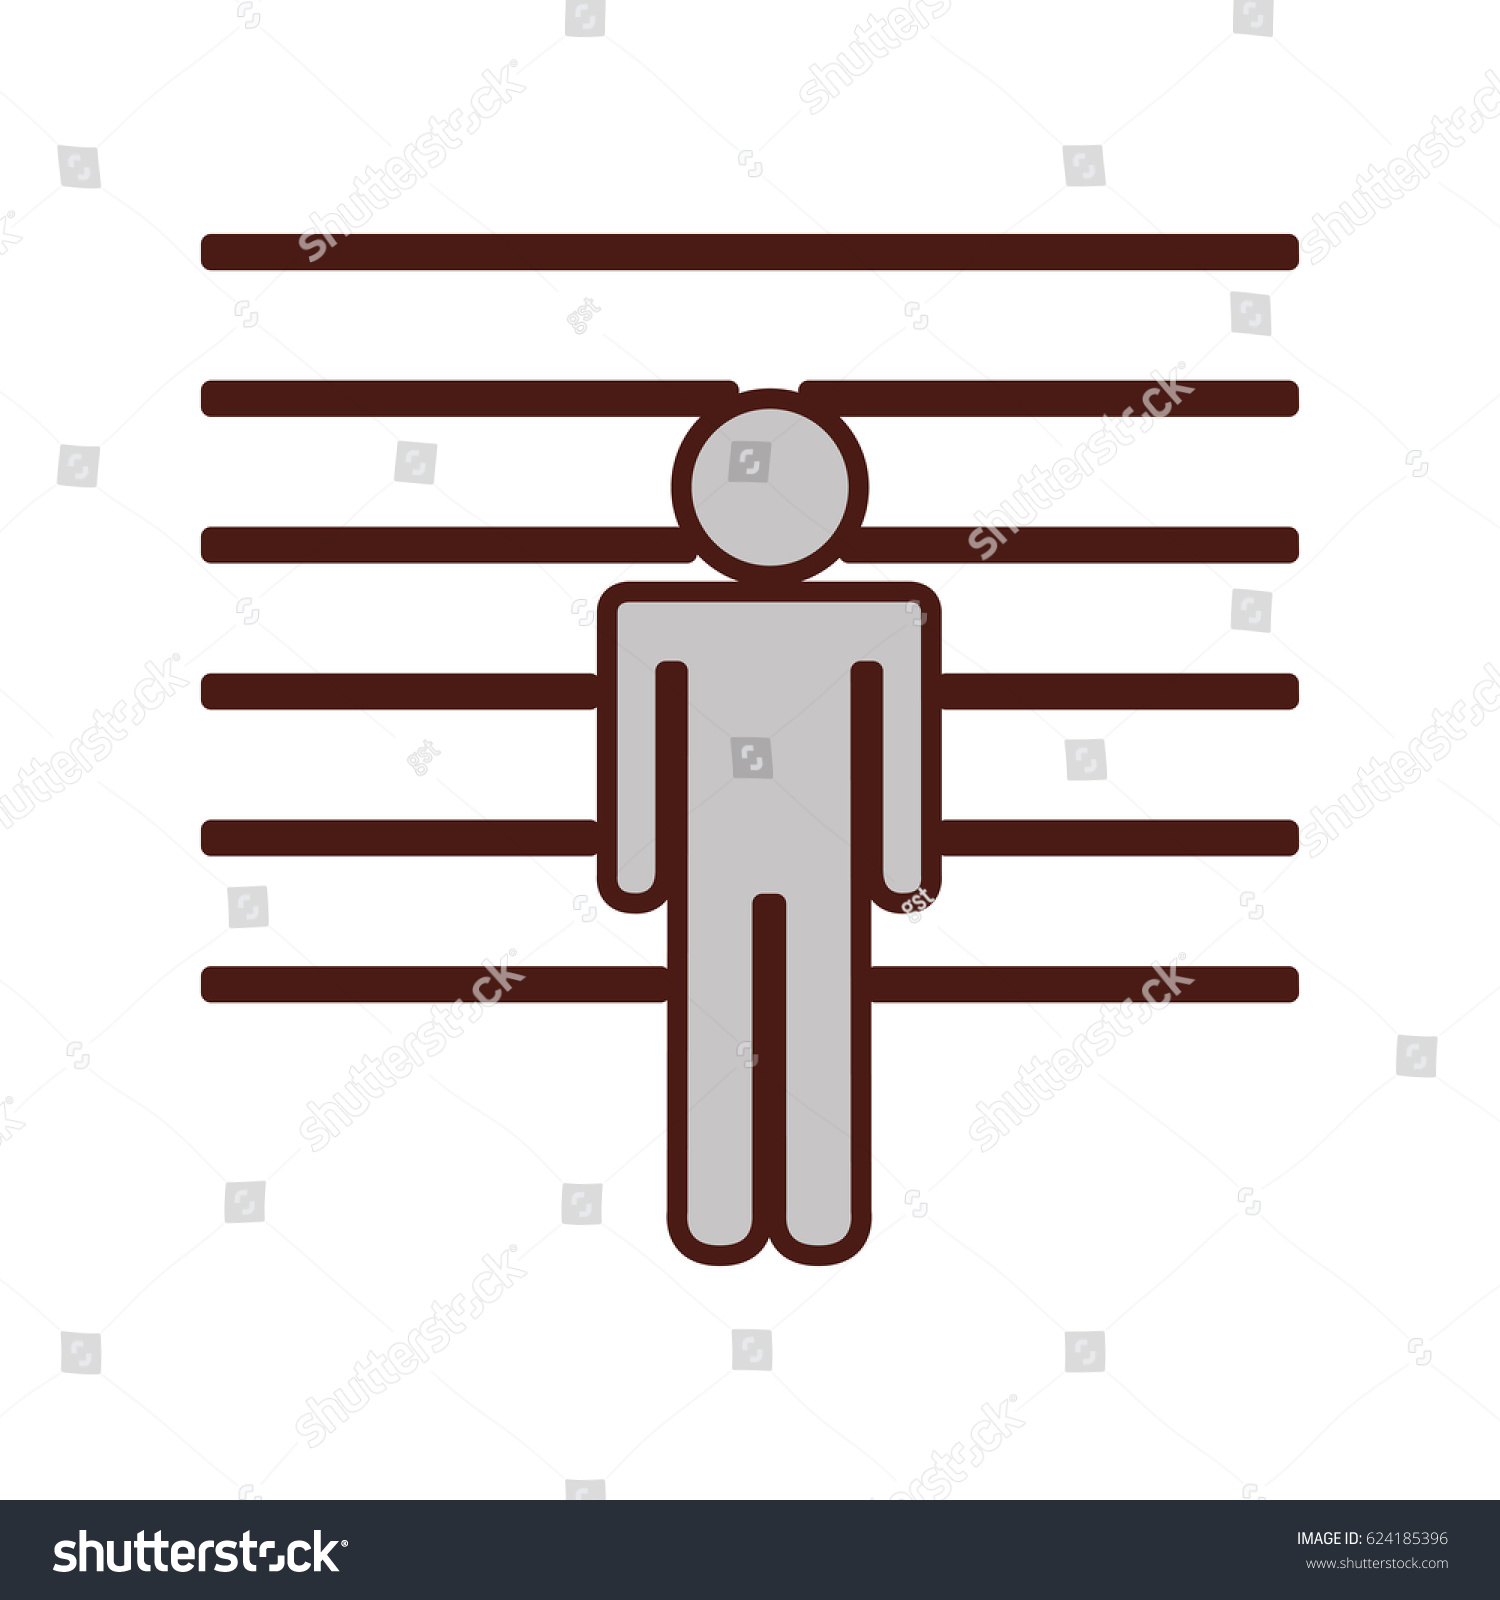 Prisoner Silhouette Isolated Icon Stock Vector Royalty Free Shutterstock